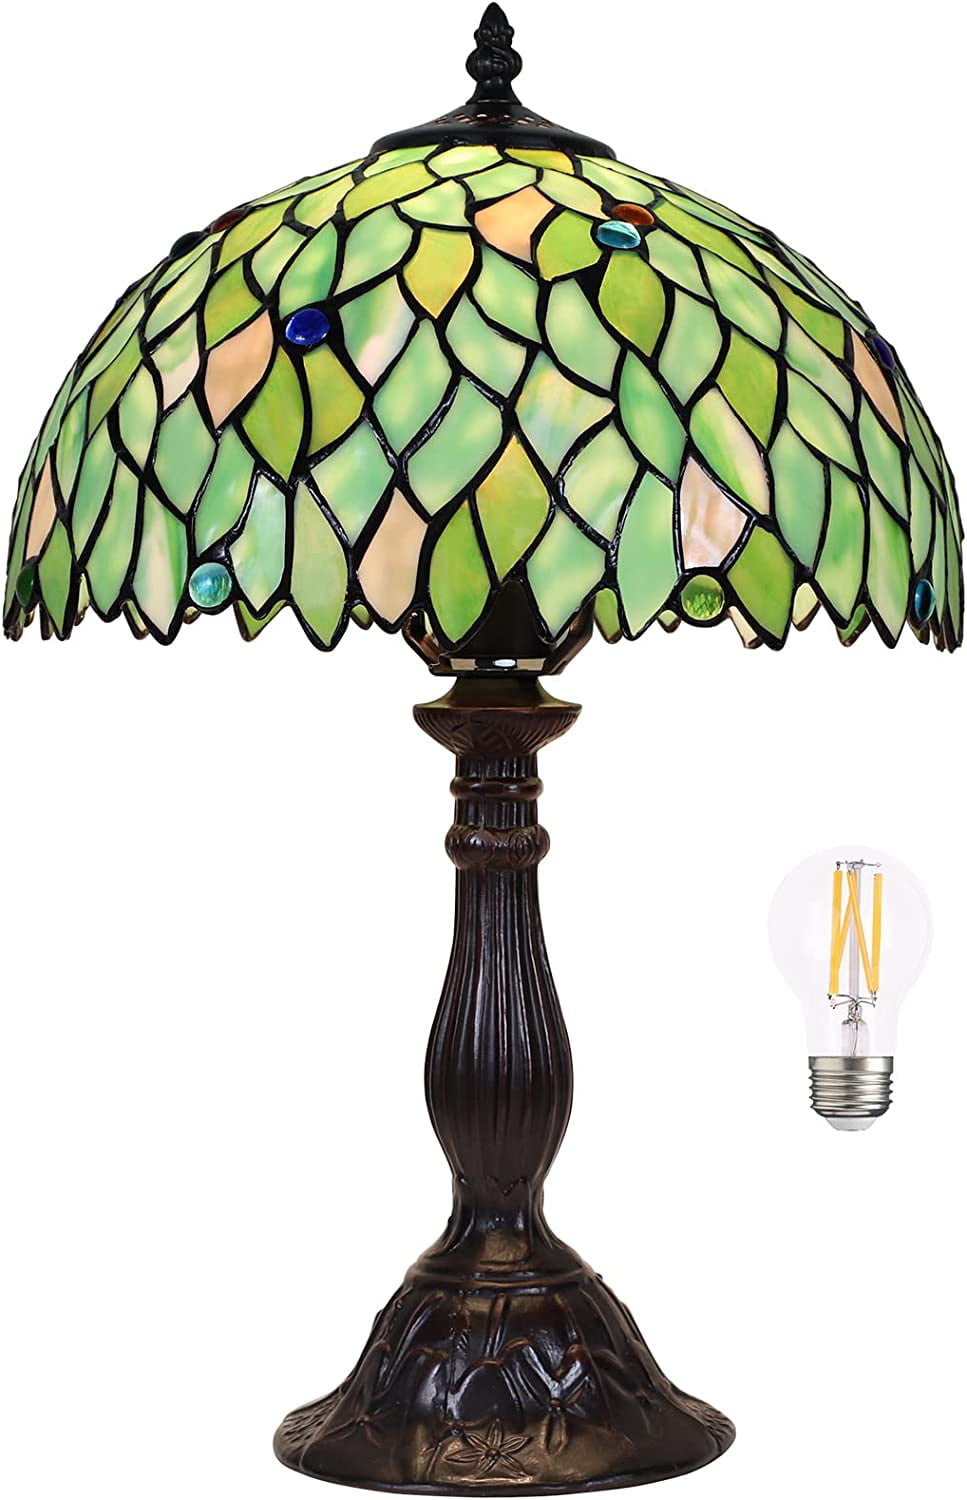 YELROL  Lamp Table Lamp Stained Glass Leaf Bedside Lamp Reading Desk Light for Bedroom Living Room Green 18\u201D Tall 1 PCS LED Bulb(2700K E26) Included Unique Gifts